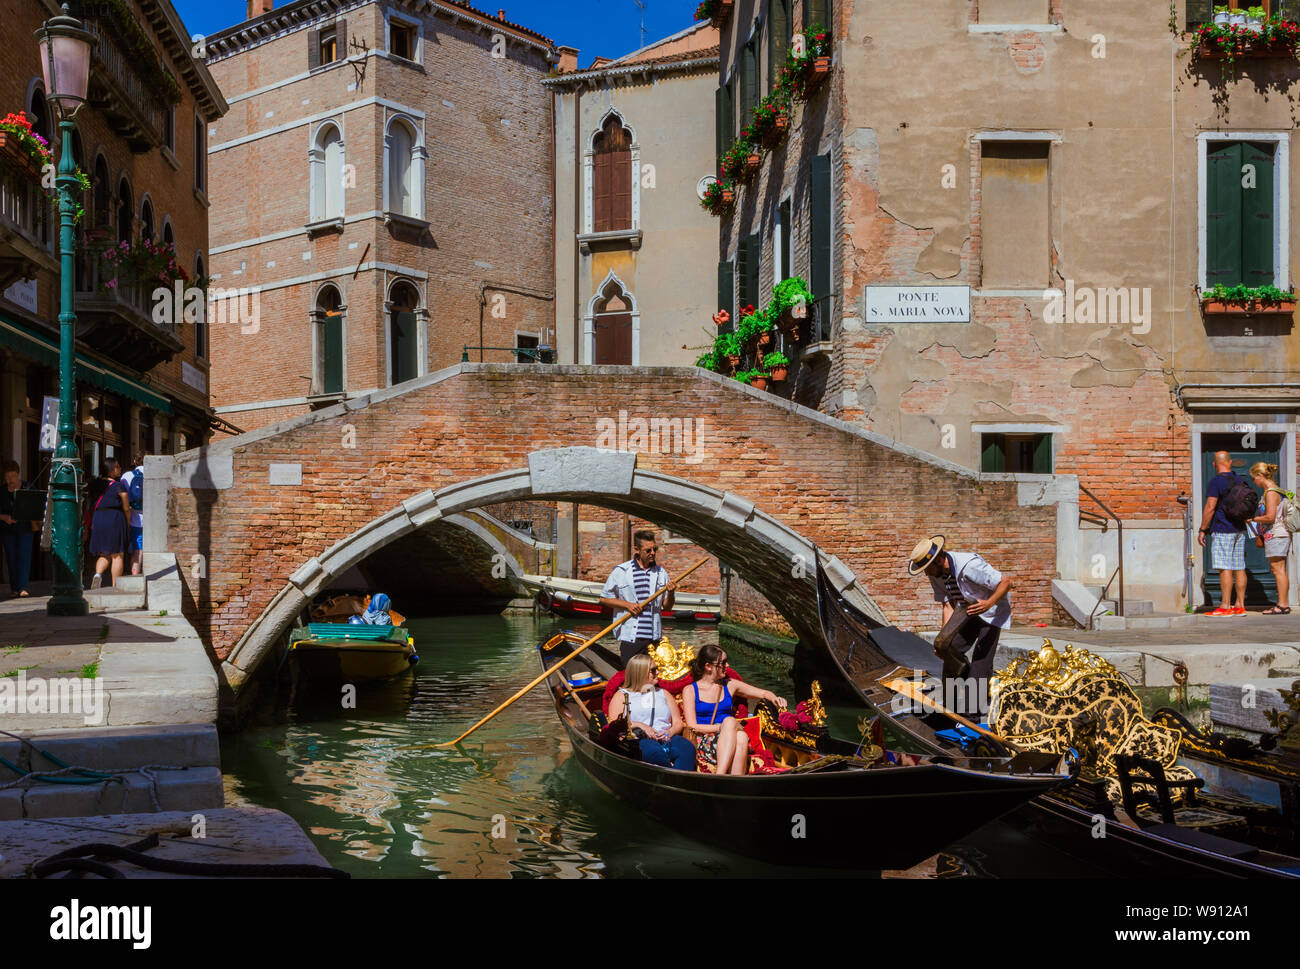 Sightseeing in Venice. Tourists take a private gondola tour in the city historical center Stock Photo